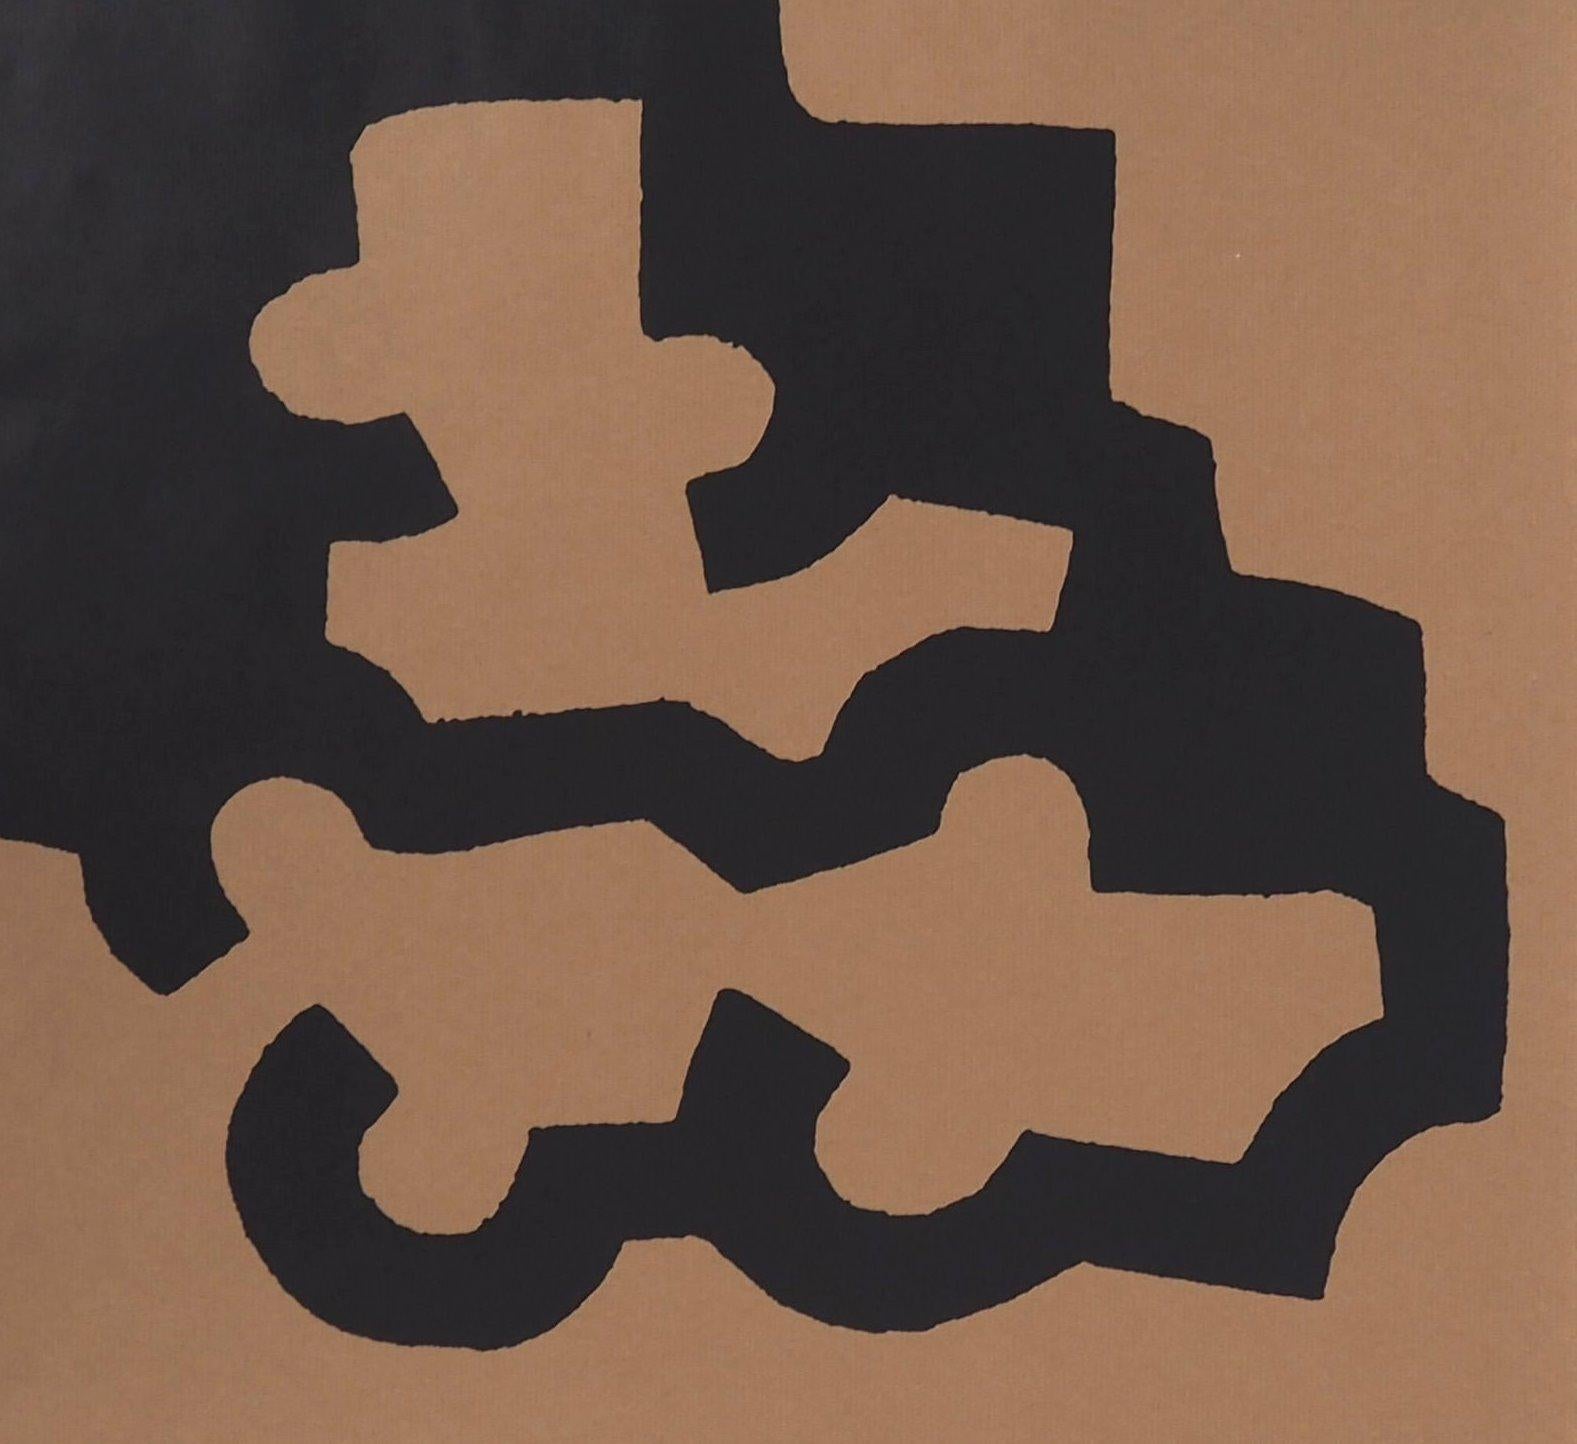 Eduardo CHILLIDA (after)
Abstraction in Black

Lithograph
Signed in the plate
On paper kraft 81 x 55,5 cm (c. 32 x 22 in)

Excellent condition